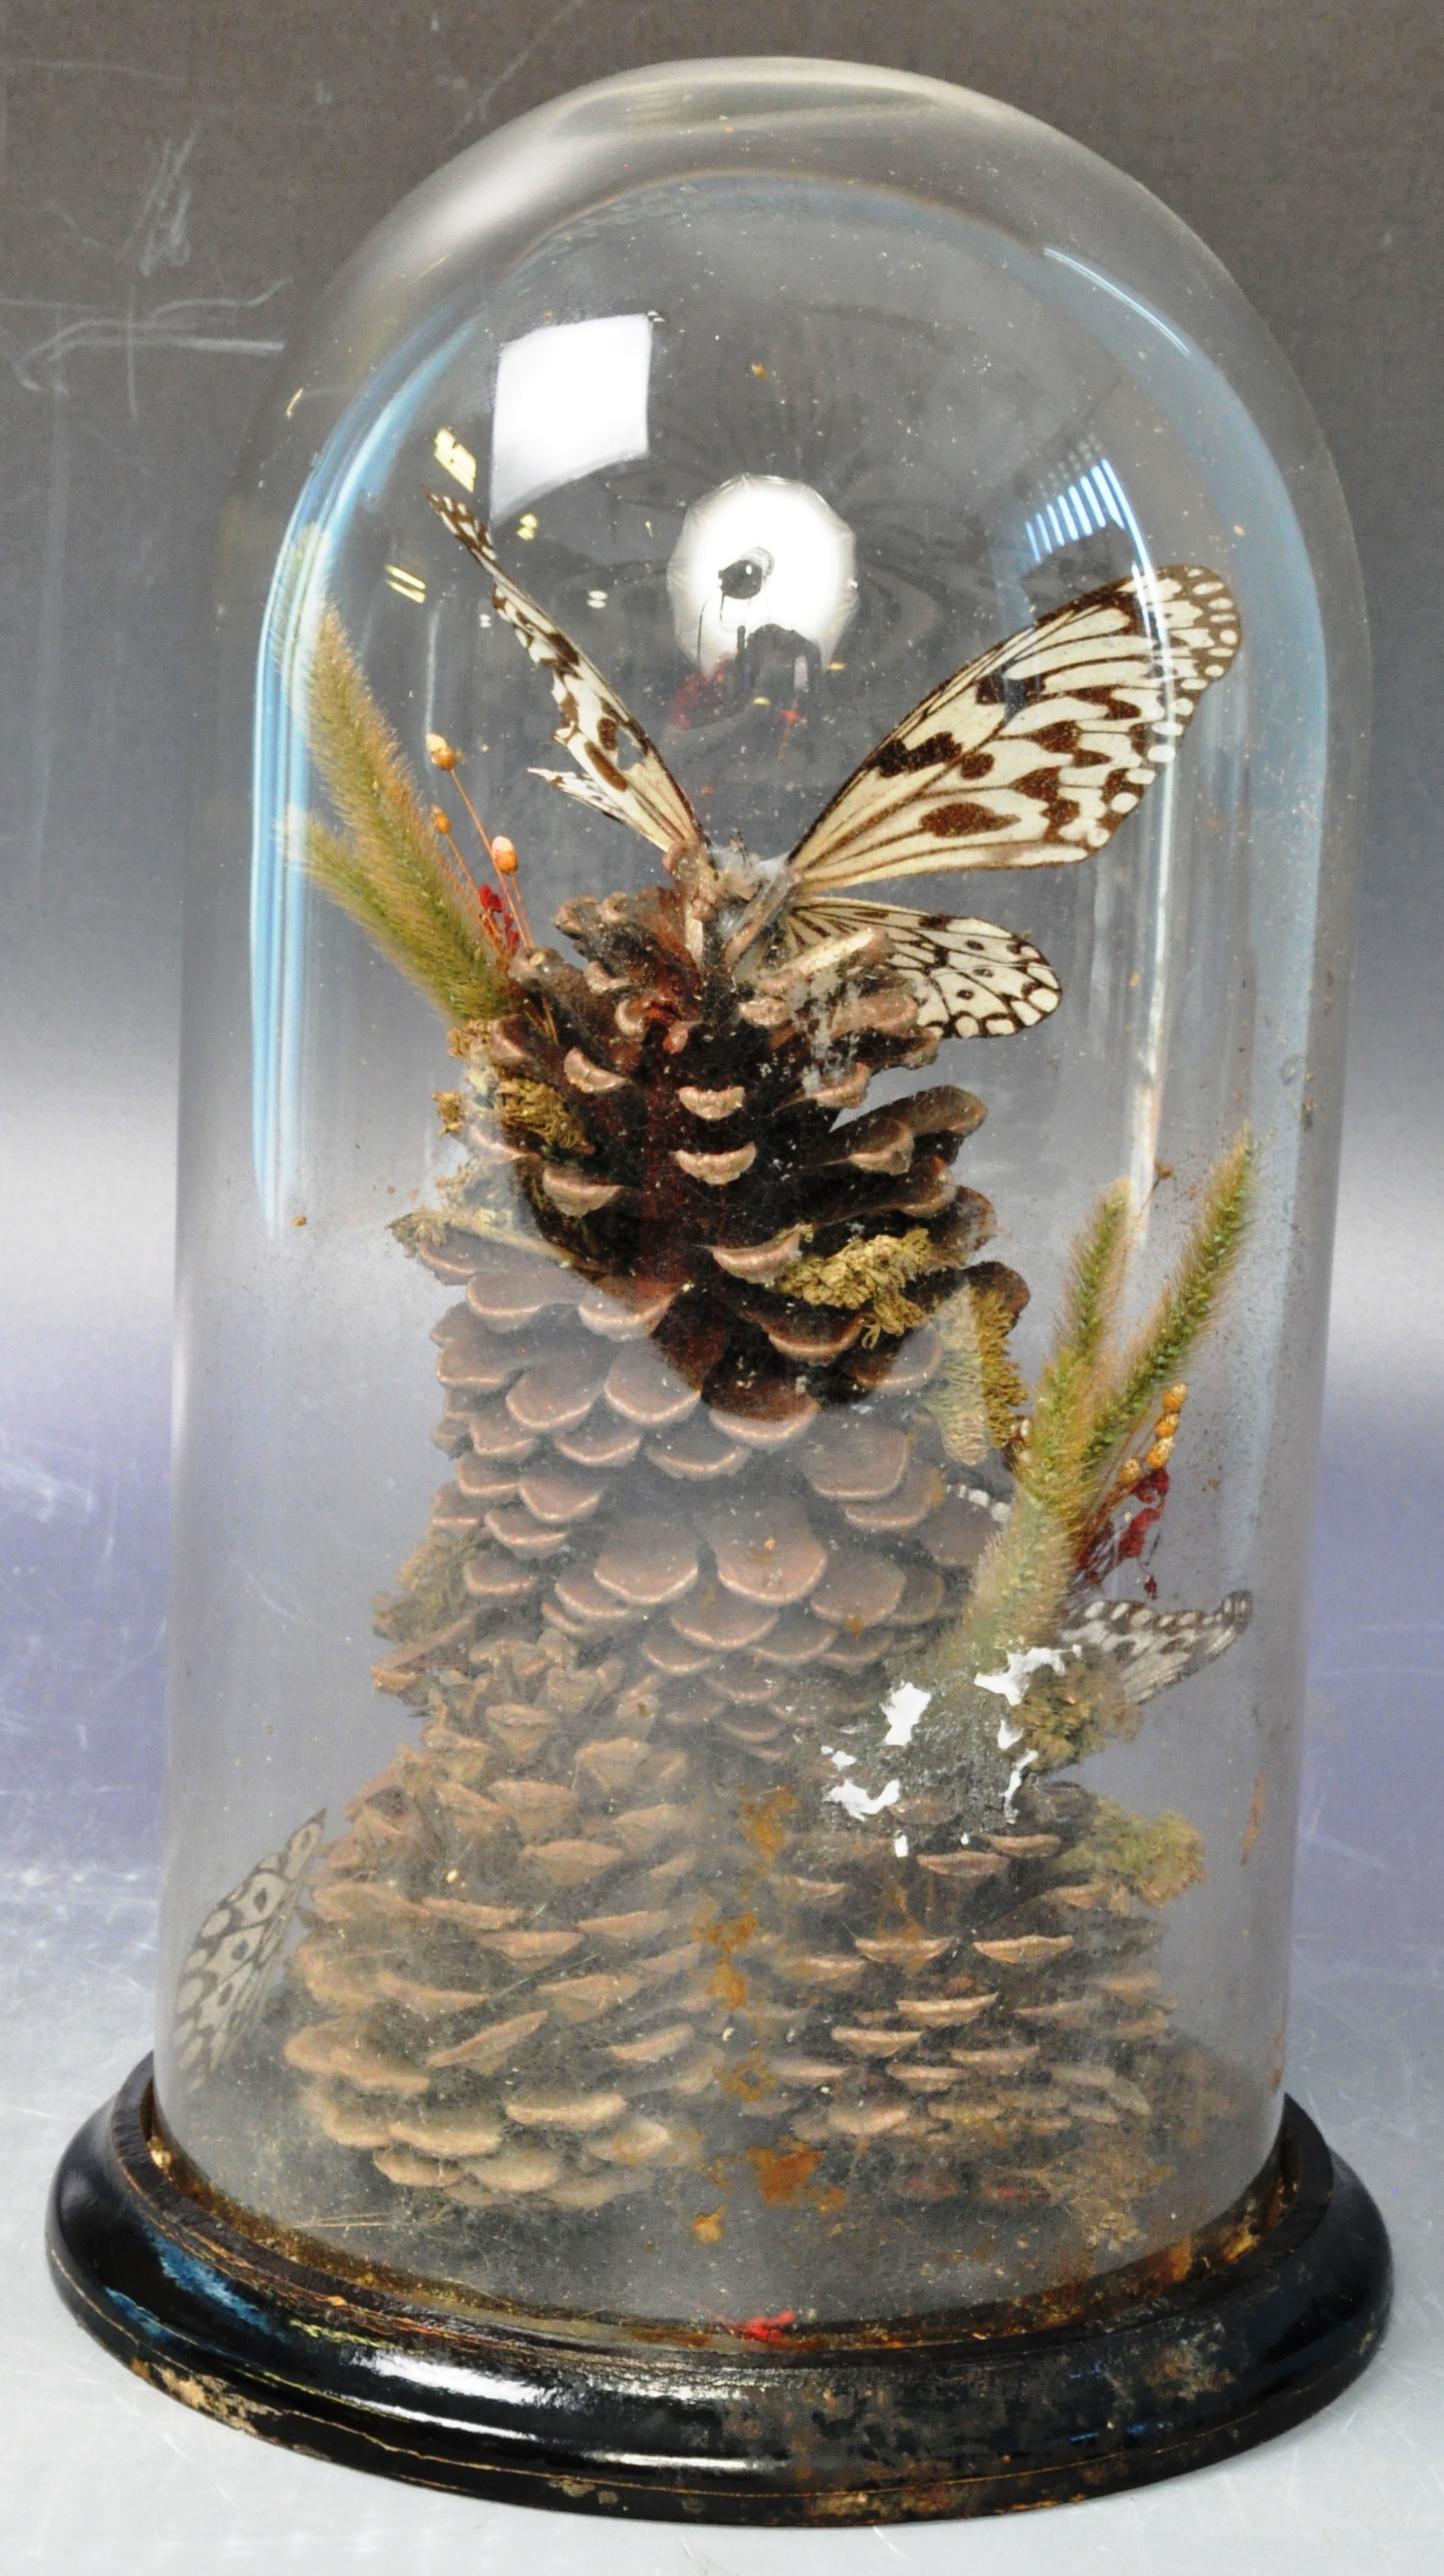 19TH CENTURY ANTIQUE VICTORIAN TAXIDERMY BUTTERFLIES IN GLASS DOME - Image 3 of 11